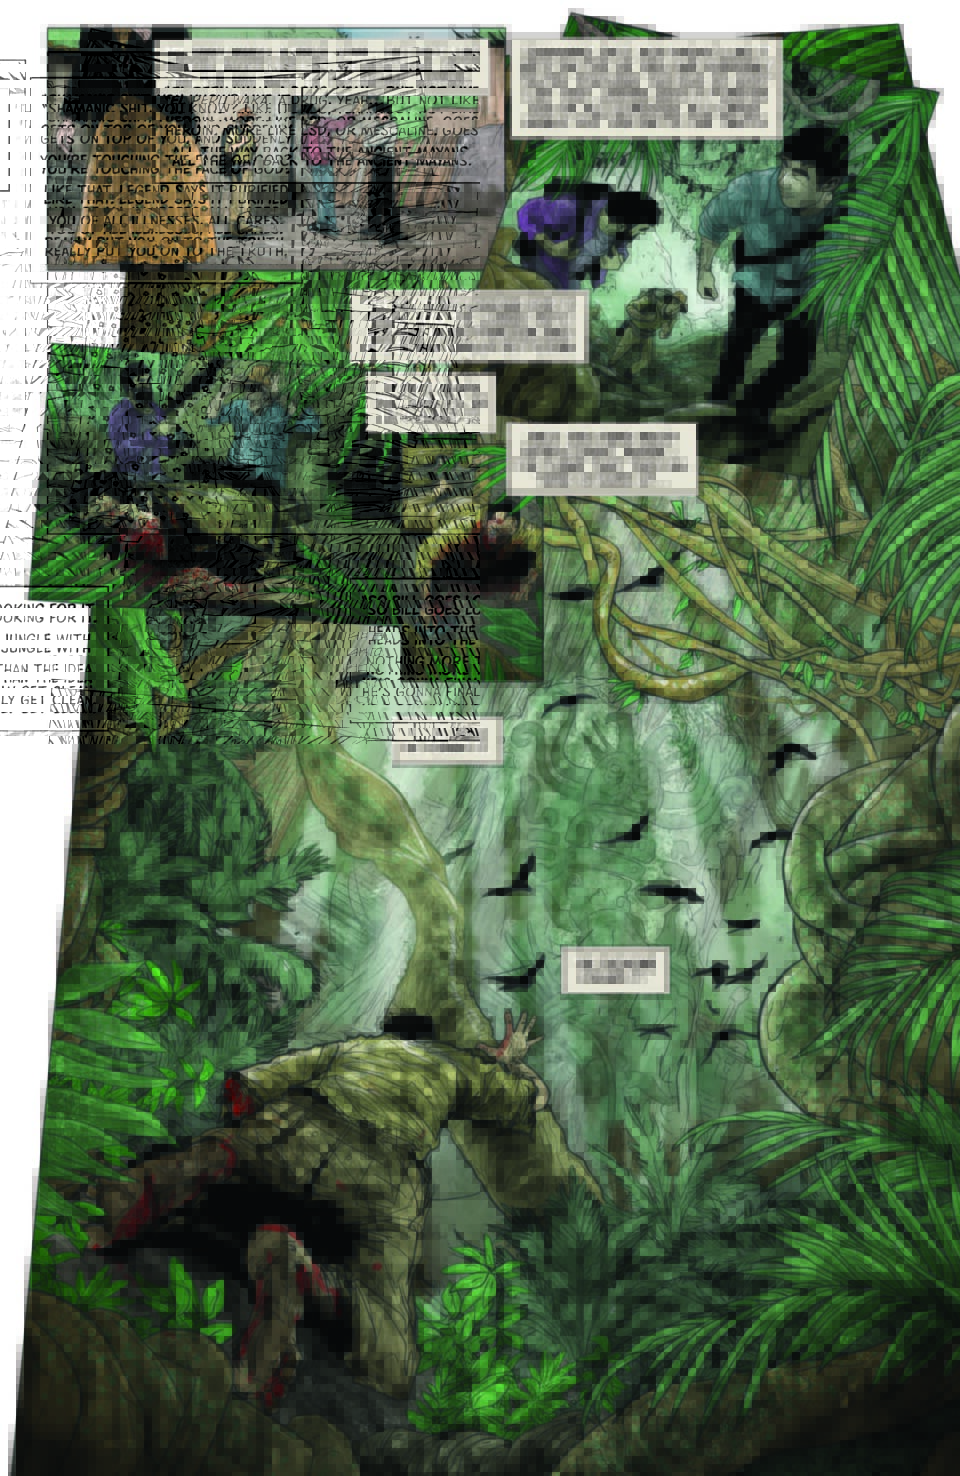 Breath of Shadows pp 7 9 Page 3 960x1476 - 'Breath Of Shadows' Is One Hellish Trip [Exclusive]